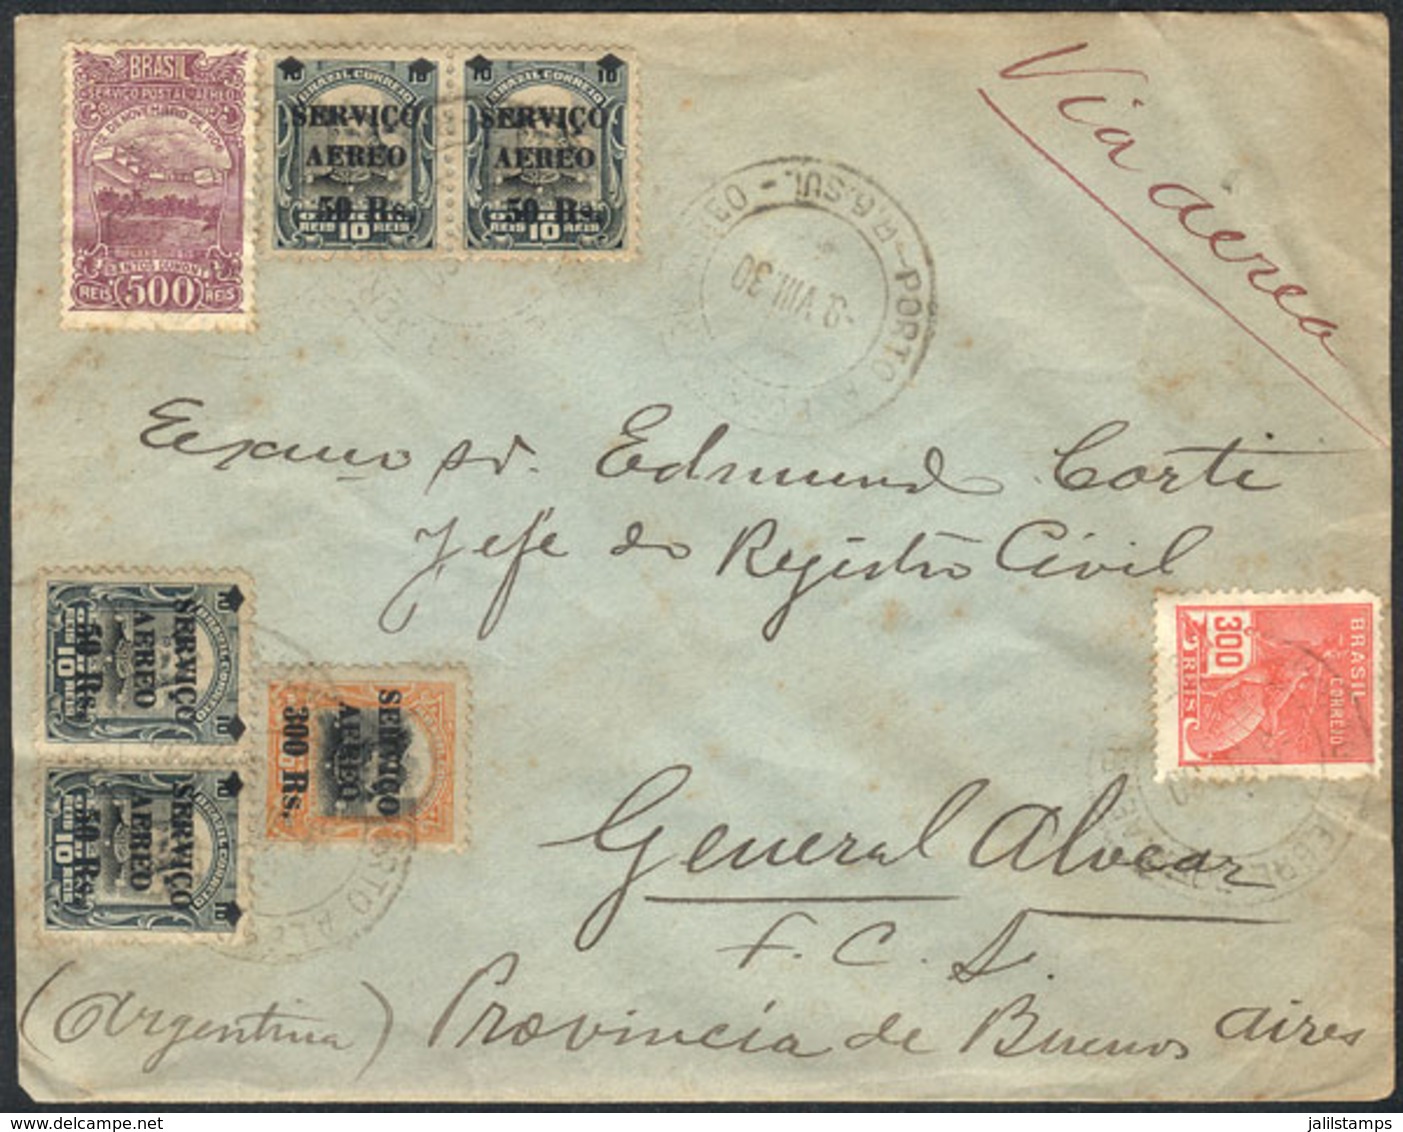 BRAZIL: 9/AU/1930 PORTO ALEGRE - General Alvear (Argentina): Airmail Cover With Nice Postage Of 1,300Rs., With Buenos Ai - Covers & Documents